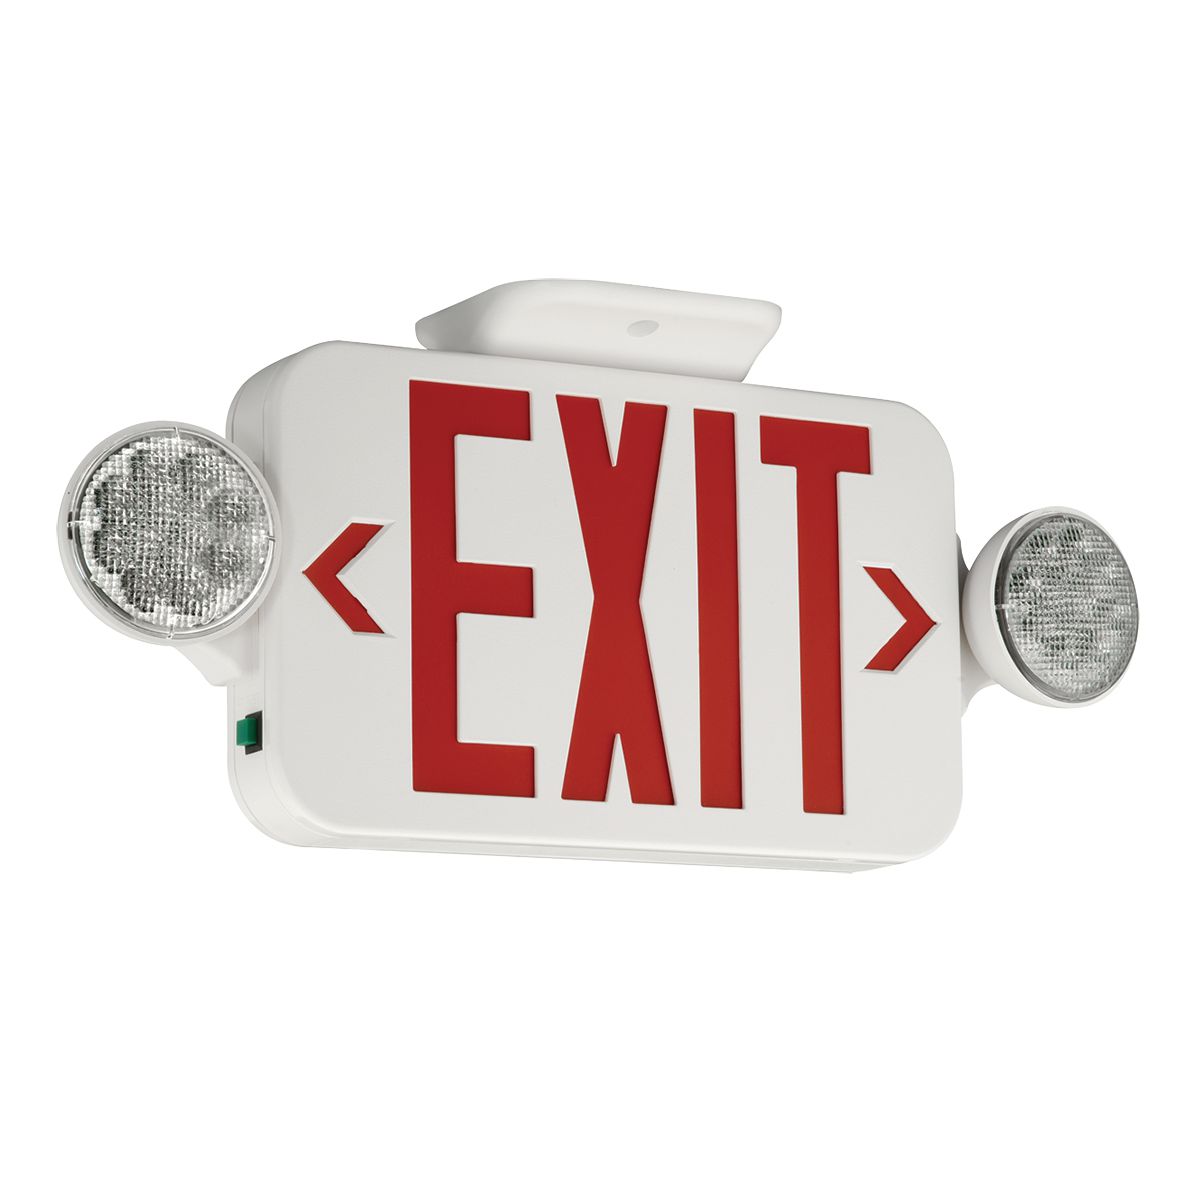 The Compass combination exit sign/emergency light offers quality and value with a compact and attractive LED based emergency exit sign with green letters and 2 fully adjustable LED lamp-heads. The white housing and lamp-heads are made of high impact, UL flame rated thermoplastic. Snap together canopy, housing and removable chevrons for quick and easy installation. The CCGRC has remote capacity to run up to 2 indoor or outdoor remote lamps. See the Compass CIRS or CIRD indoor matching remote, or CORS or CORD outdoor matching remote. Application in stair-wells, hallways, offices and other commercial applications.